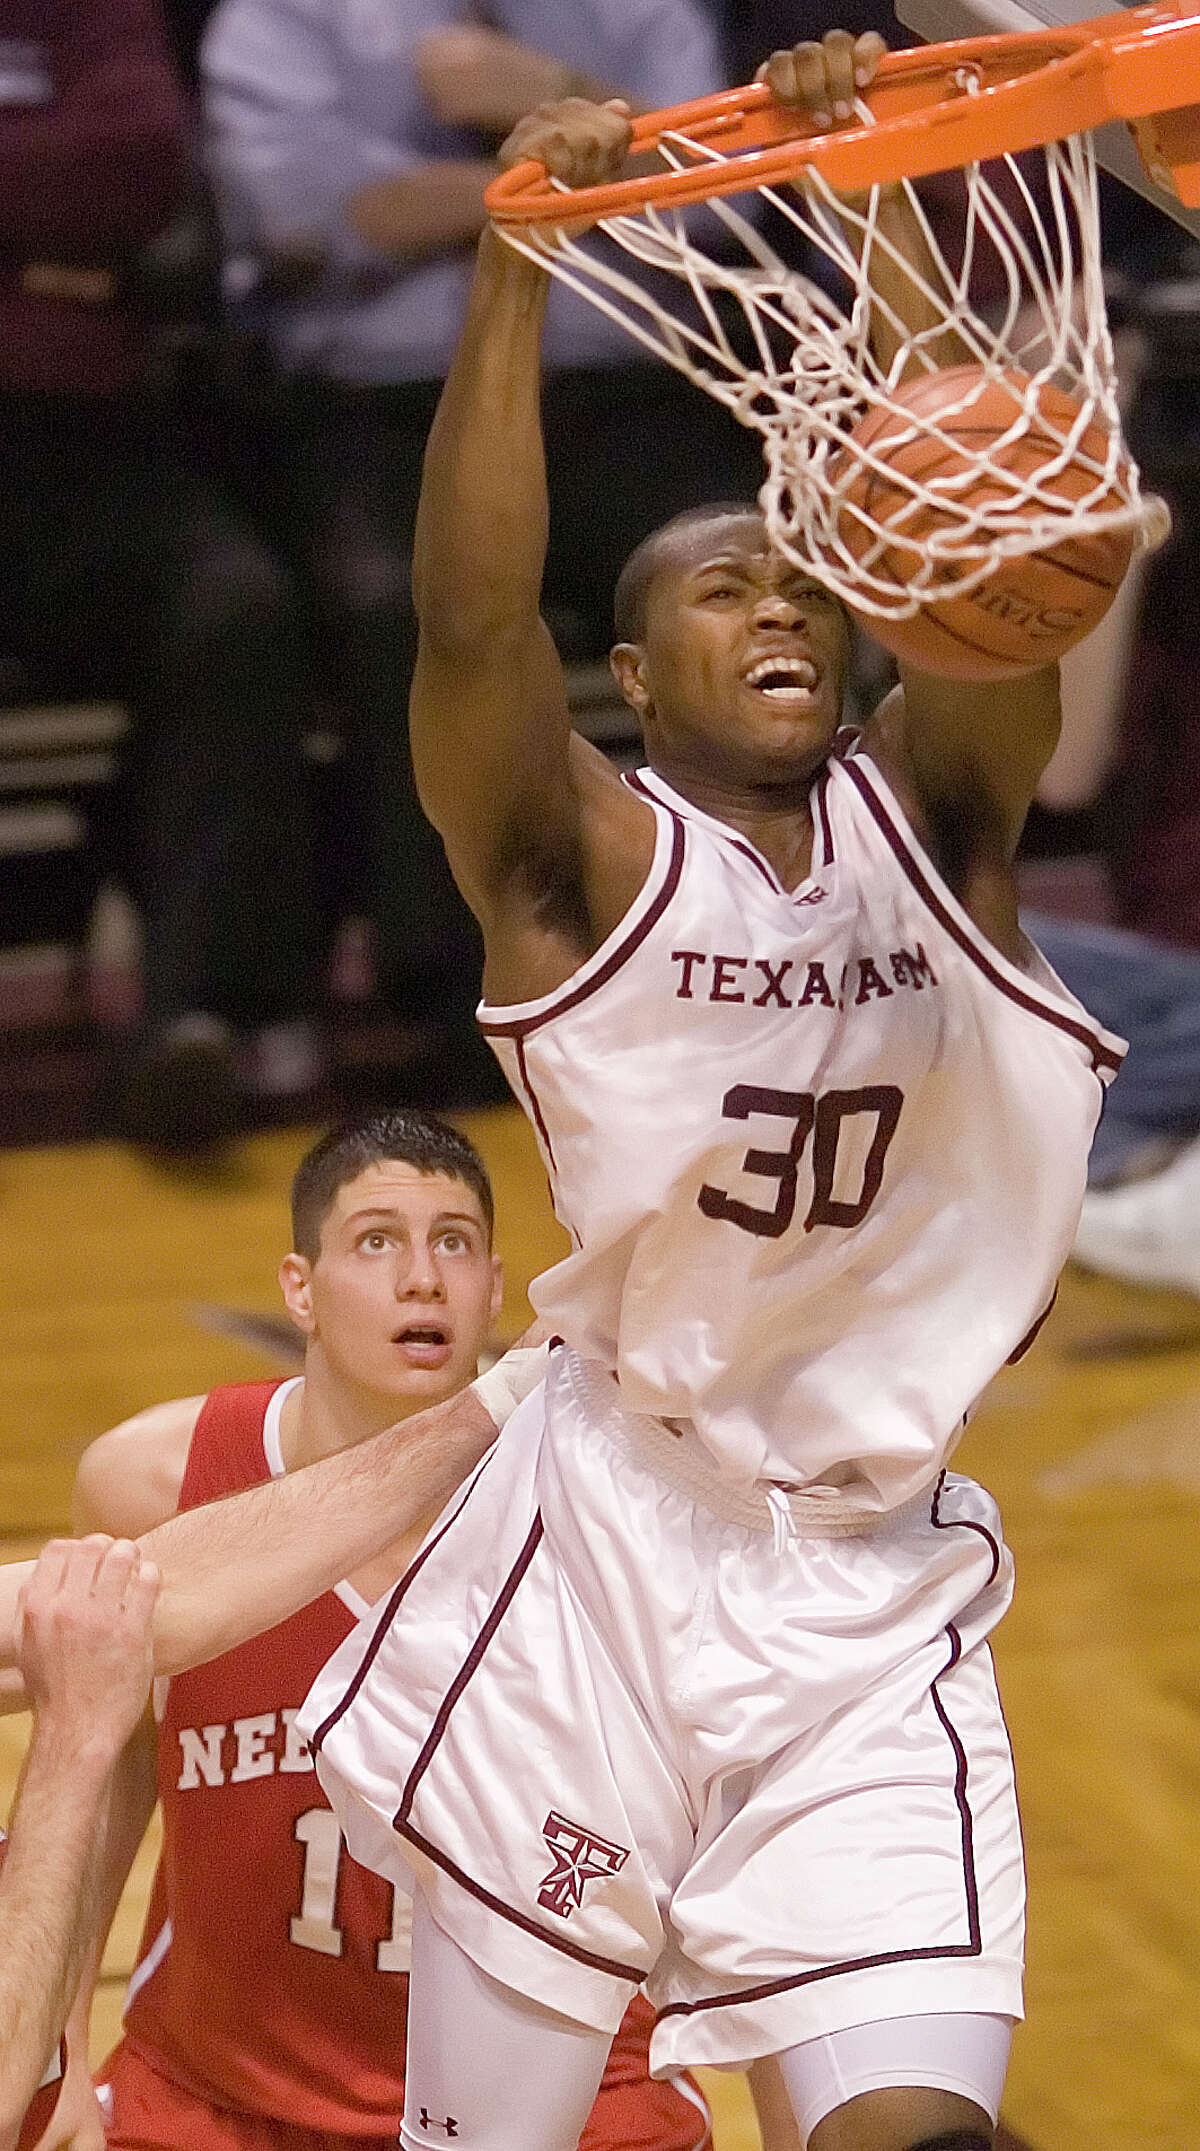 Texas A&M's Joseph Jones dunks in front of Nebraska's Wes Wilkinson during the second half of a college basketball game Saturday, Feb. 25, 2006, in College Station, Texas. Texas A&M won 66-55. (AP Photo/Bryan-College Station Eagle, Butch Ireland)